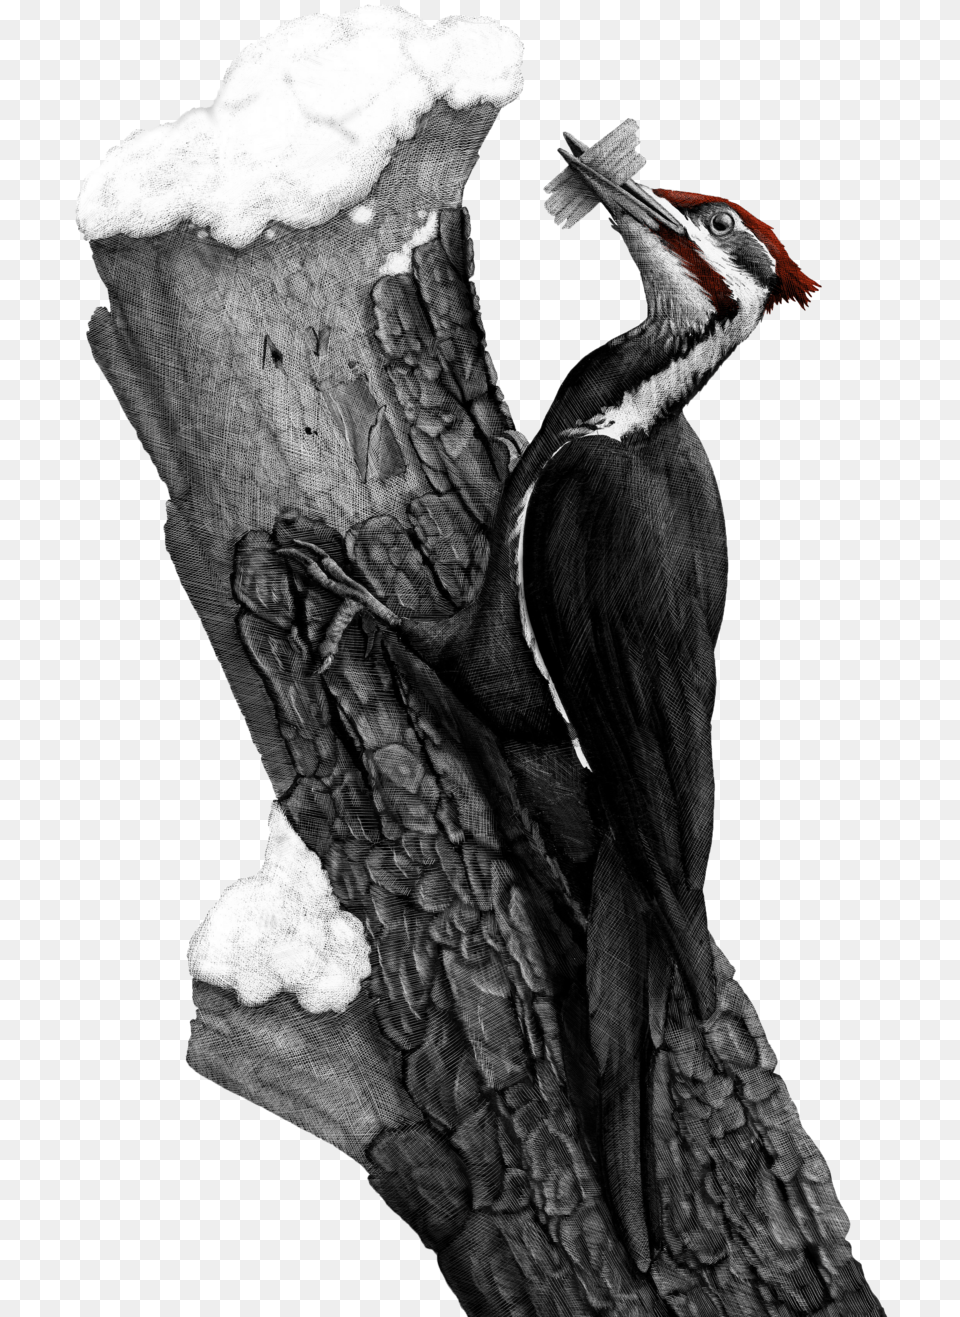 Download Pileated Woodpecker Turkey, Plant, Tree, Animal, Bird Png Image